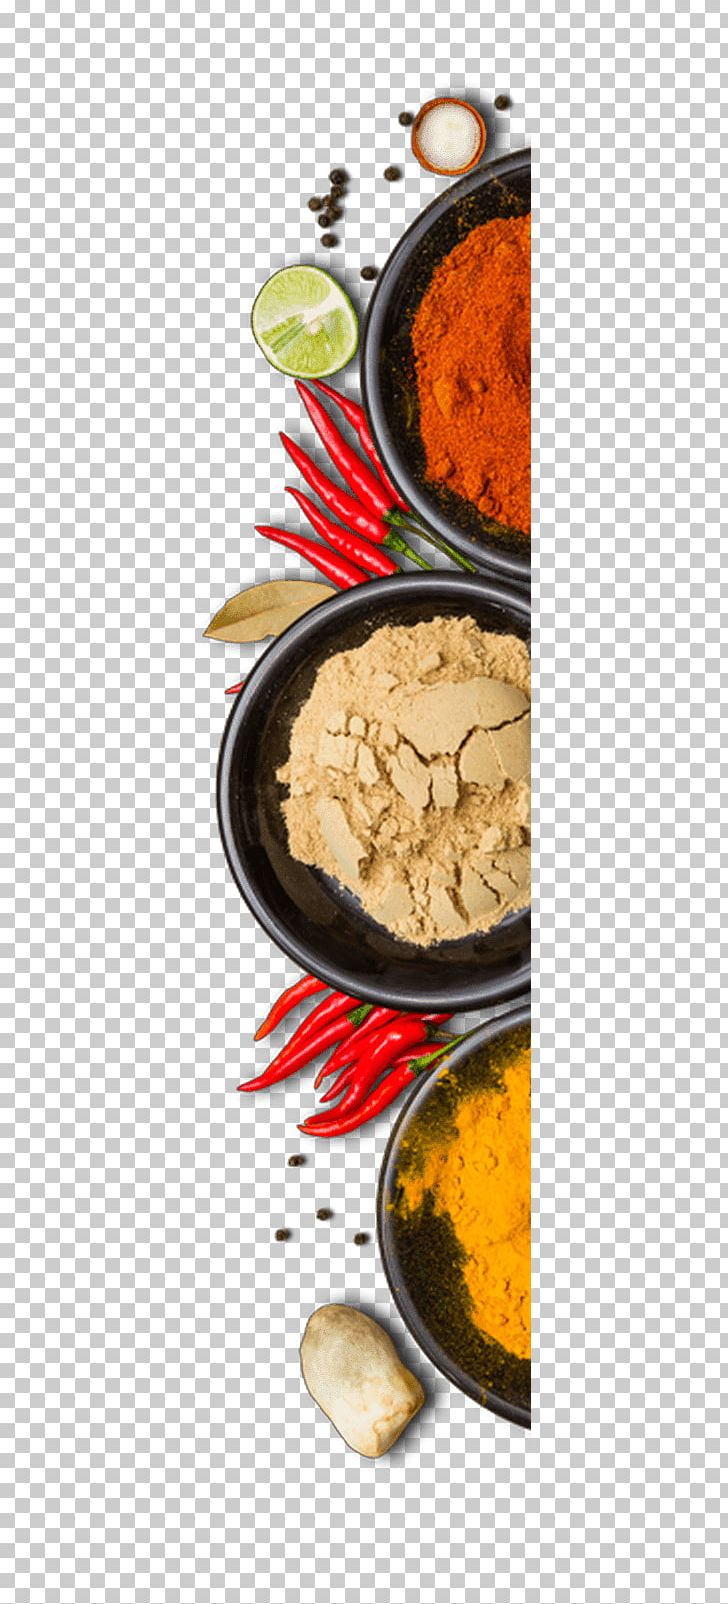 Spice Malaysian Cuisine Dish Rogan Josh PNG, Clipart, Condiment, Cuisine, Dish, Flavor, Food Free PNG Download